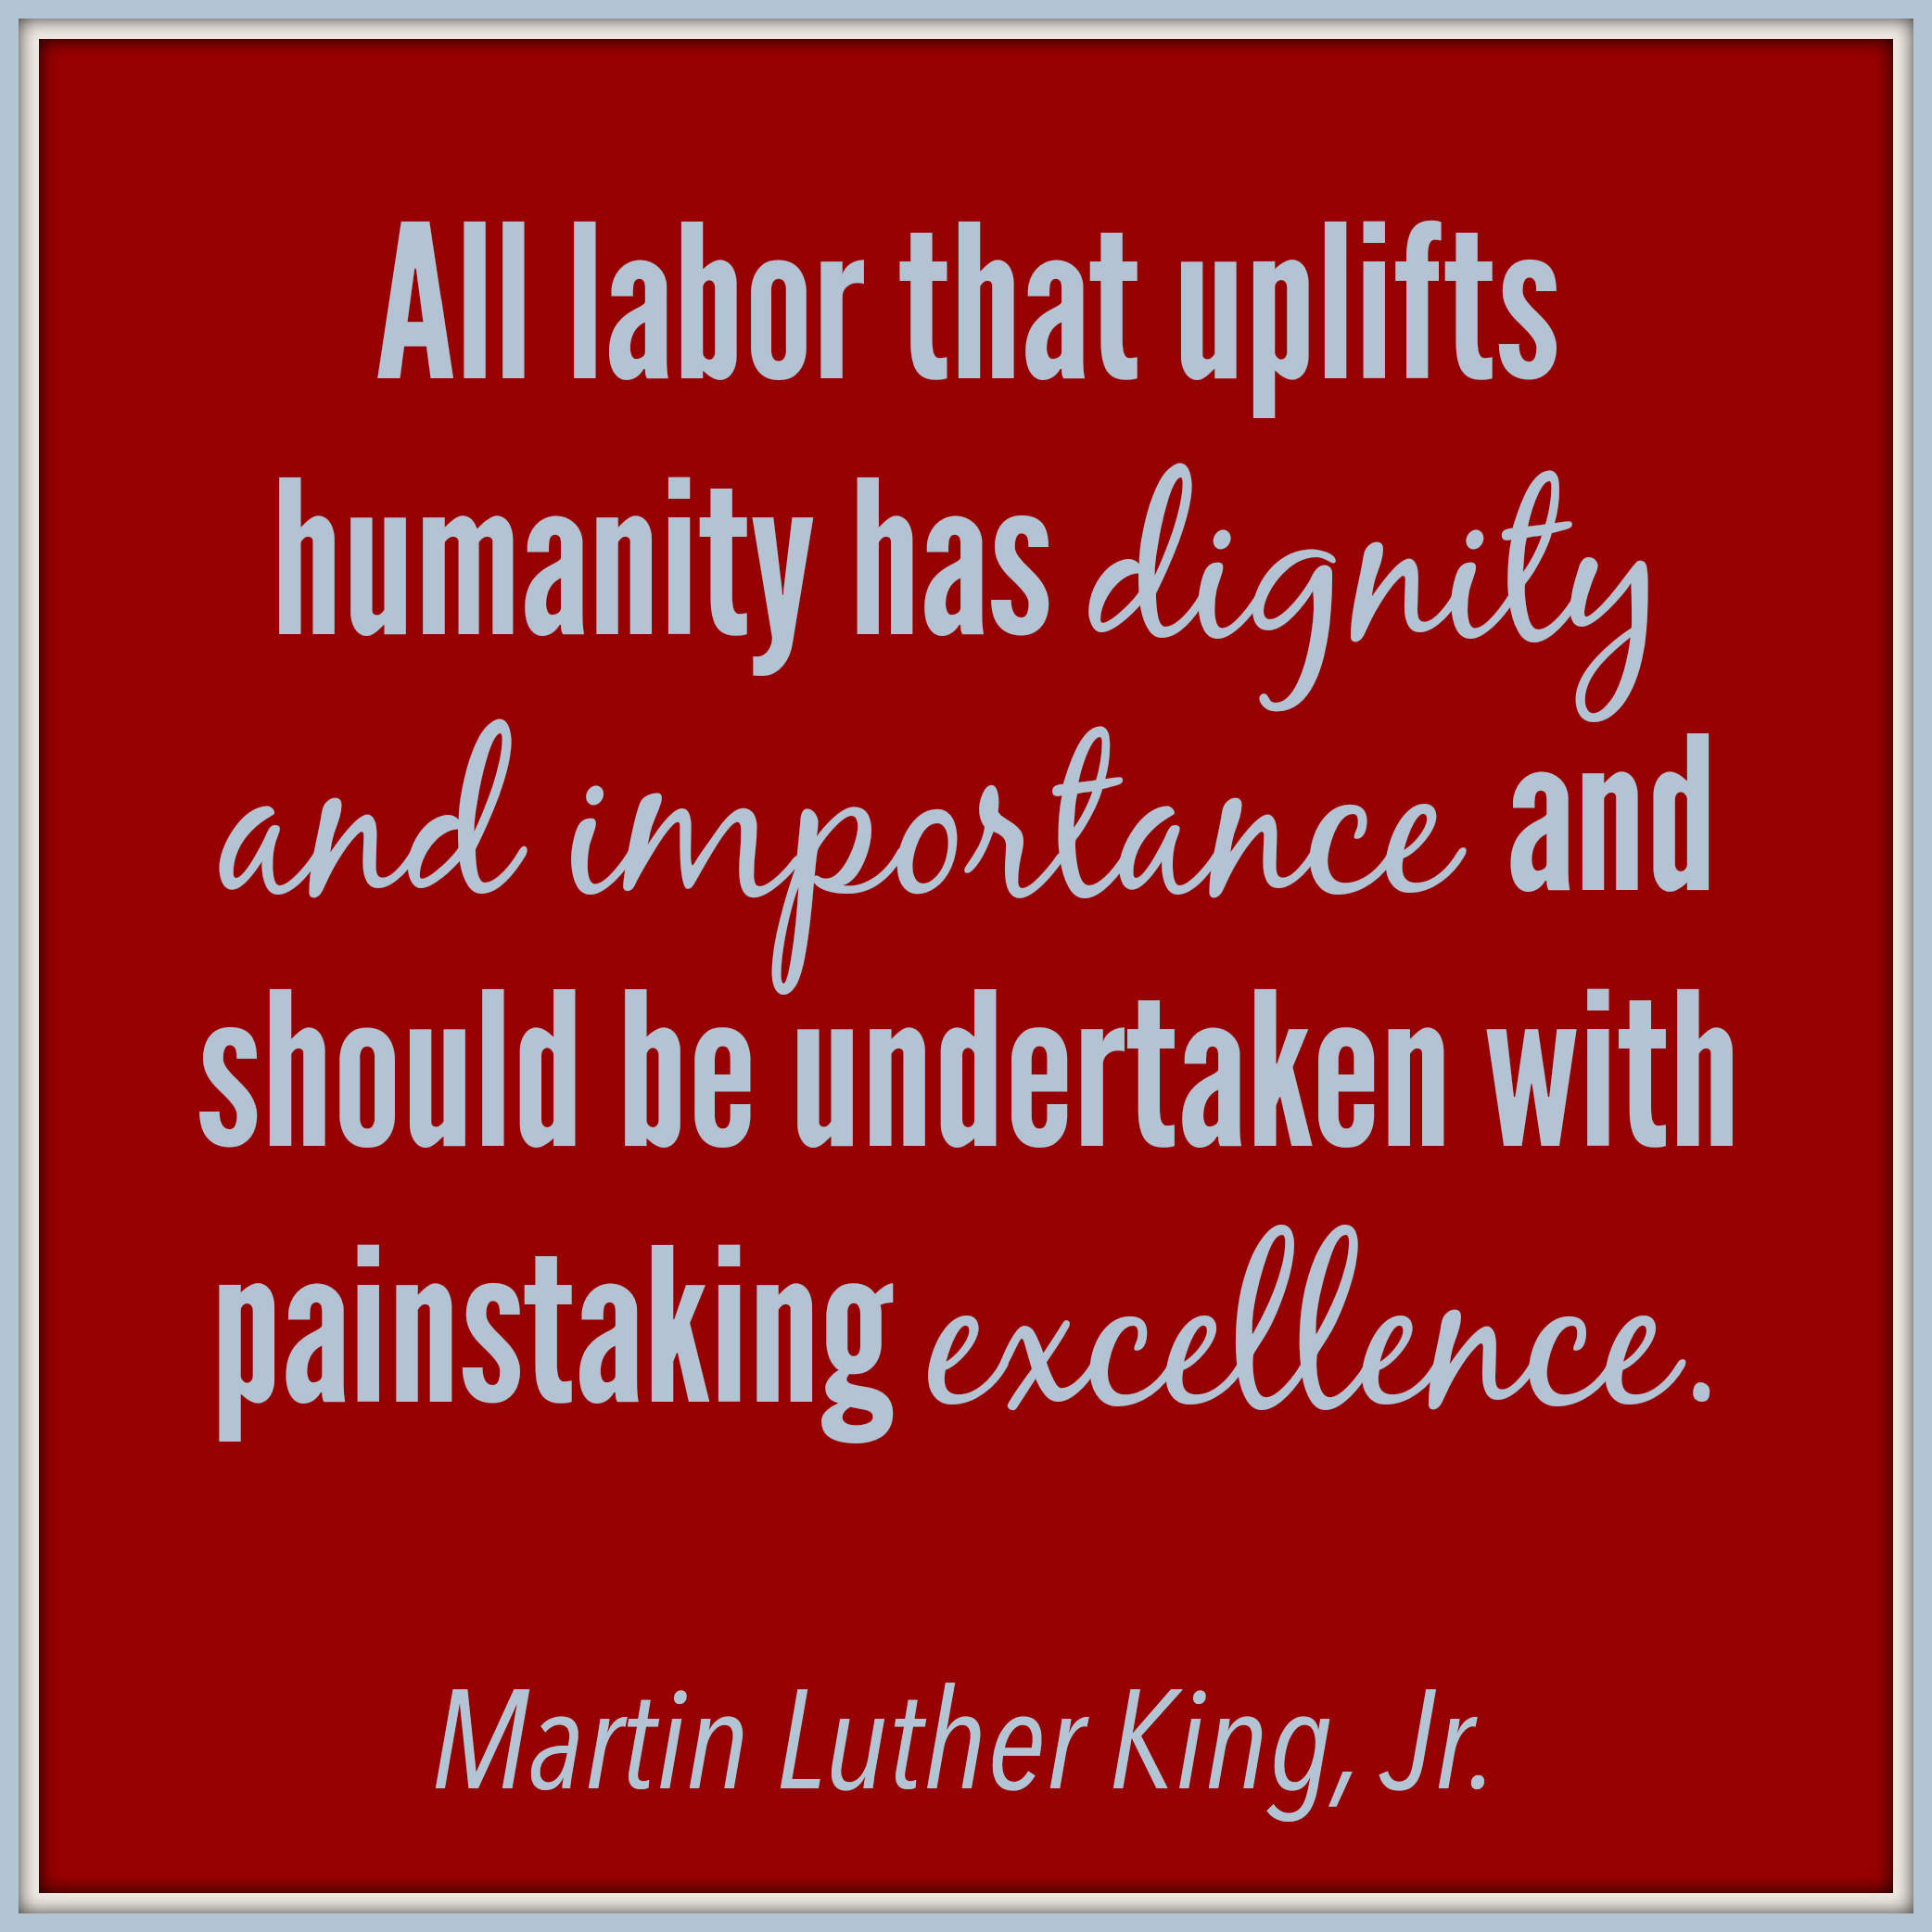 All labor that uplifts humanity has dignity and importance and should be undertaken with painstaking excellence. - Dr. Martin Luther King, Jr.